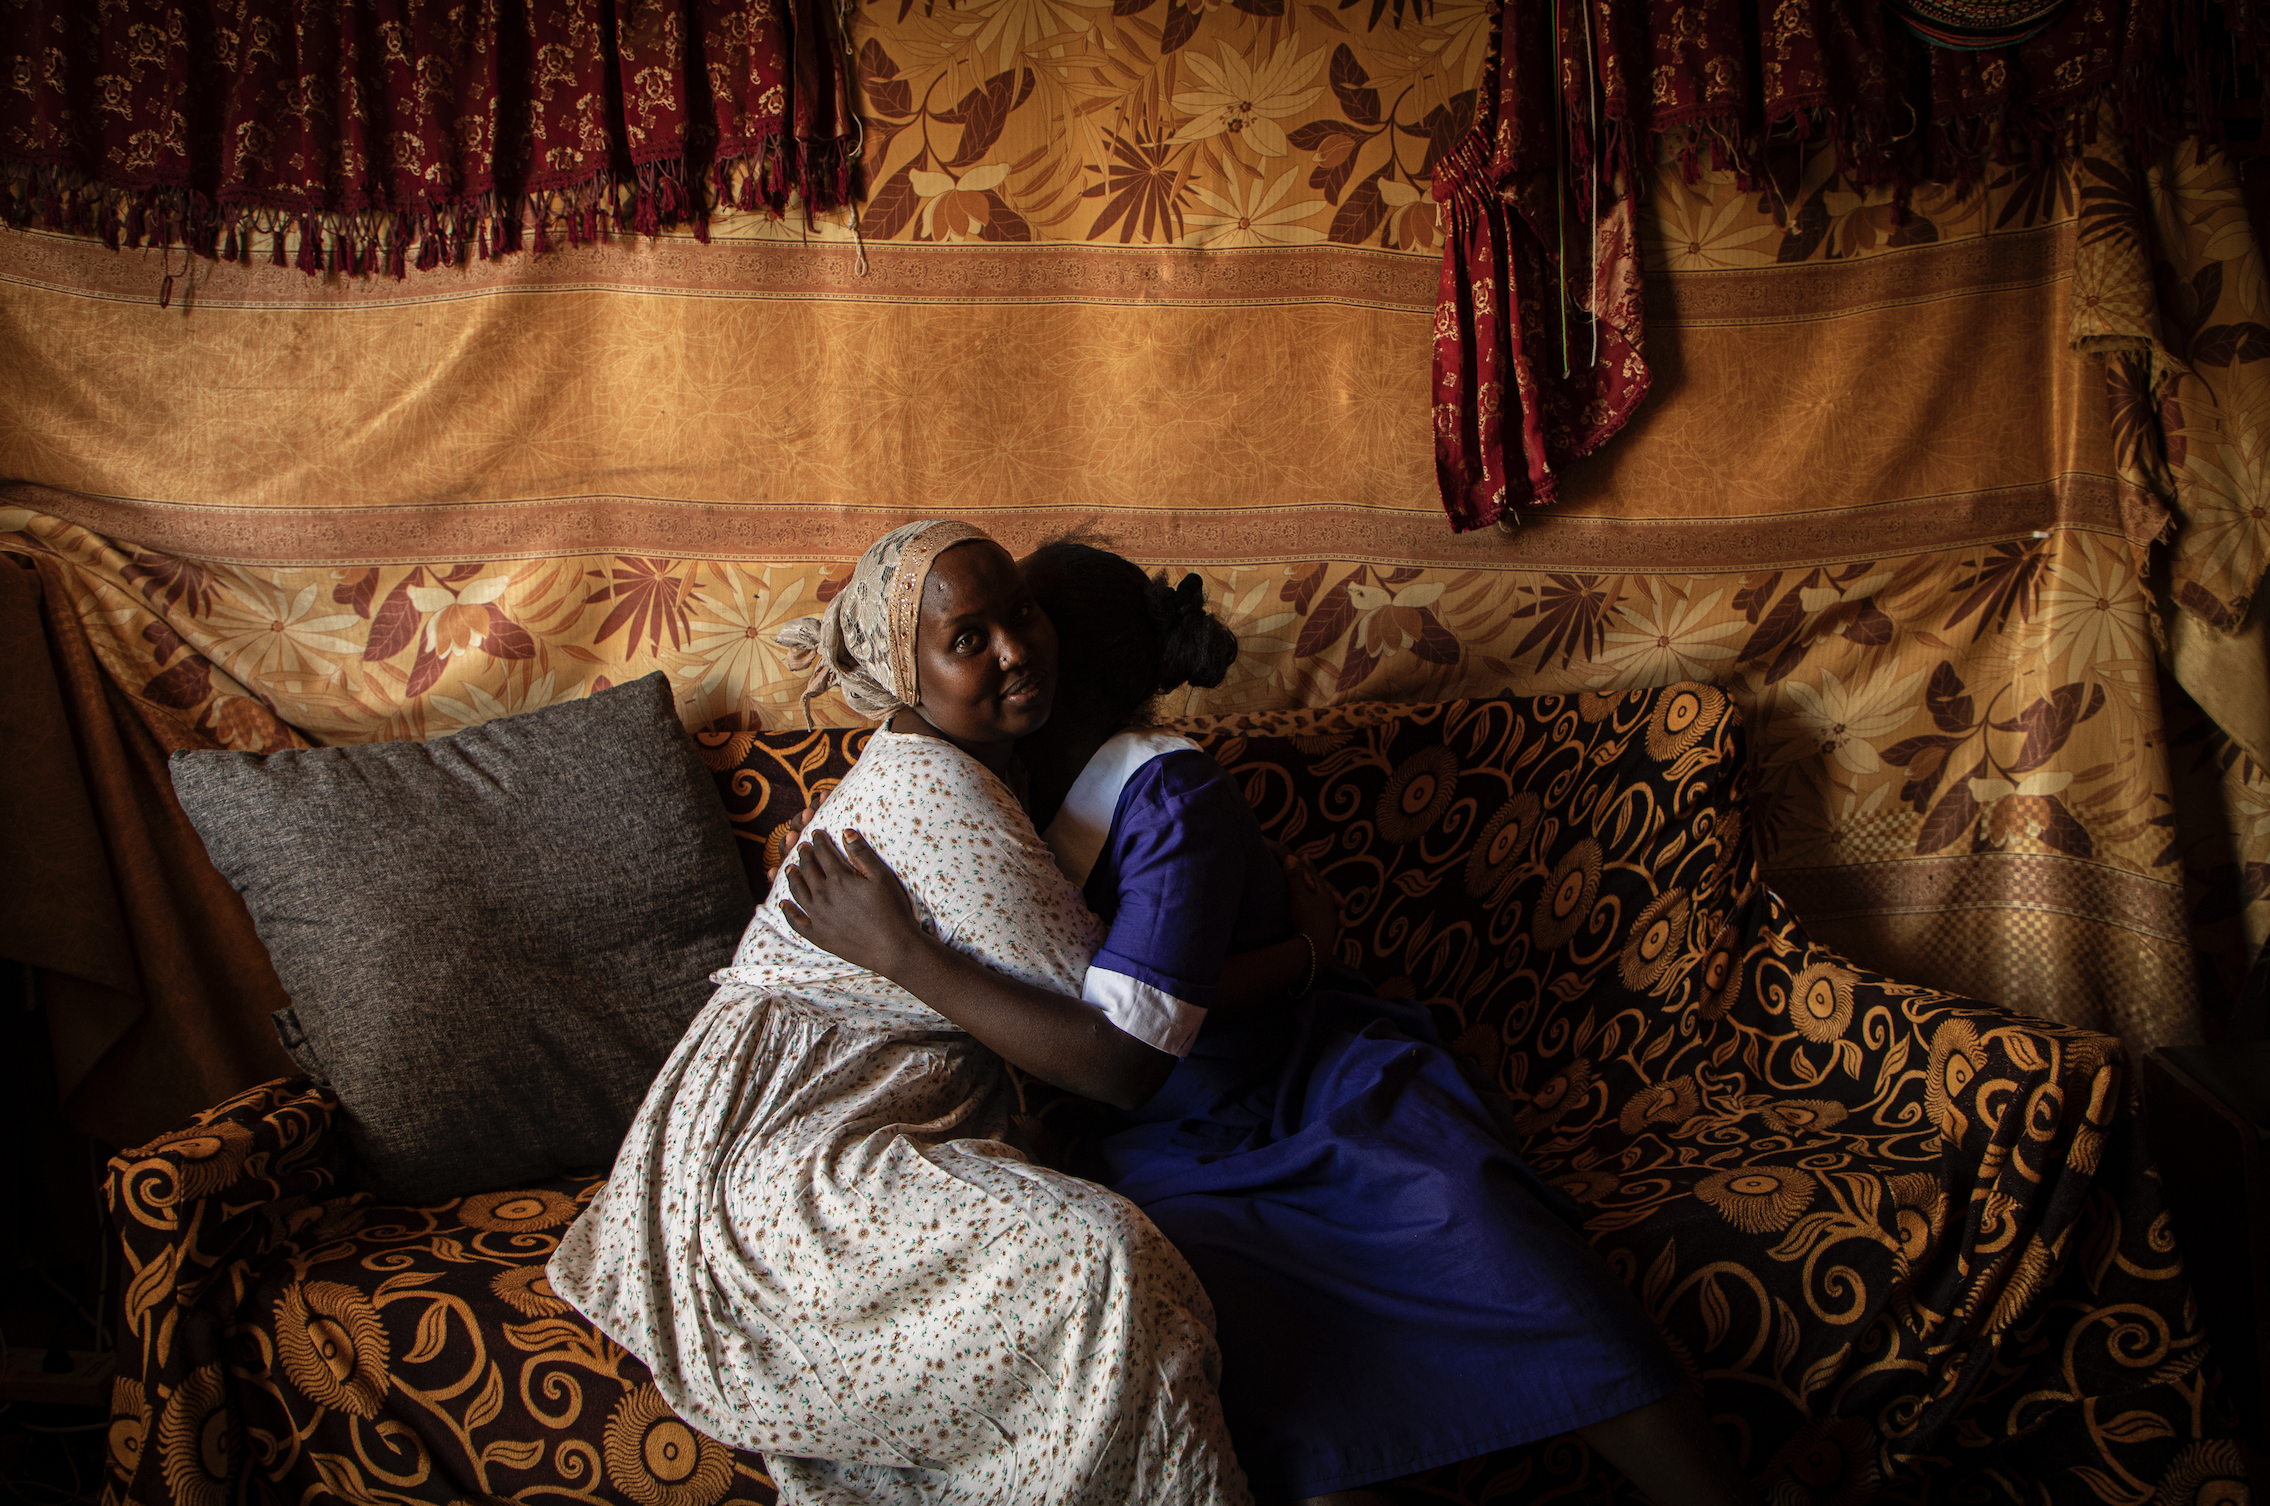 Dorcas Choya sits with Susie on her couch, who fled her home when her parents brought a circumciser to cut her. “When I saw her I just ran,” said Susie. “I didn’t bother taking anything. I ran without shoes." Image by Will Swanson. Kenya, 2020.